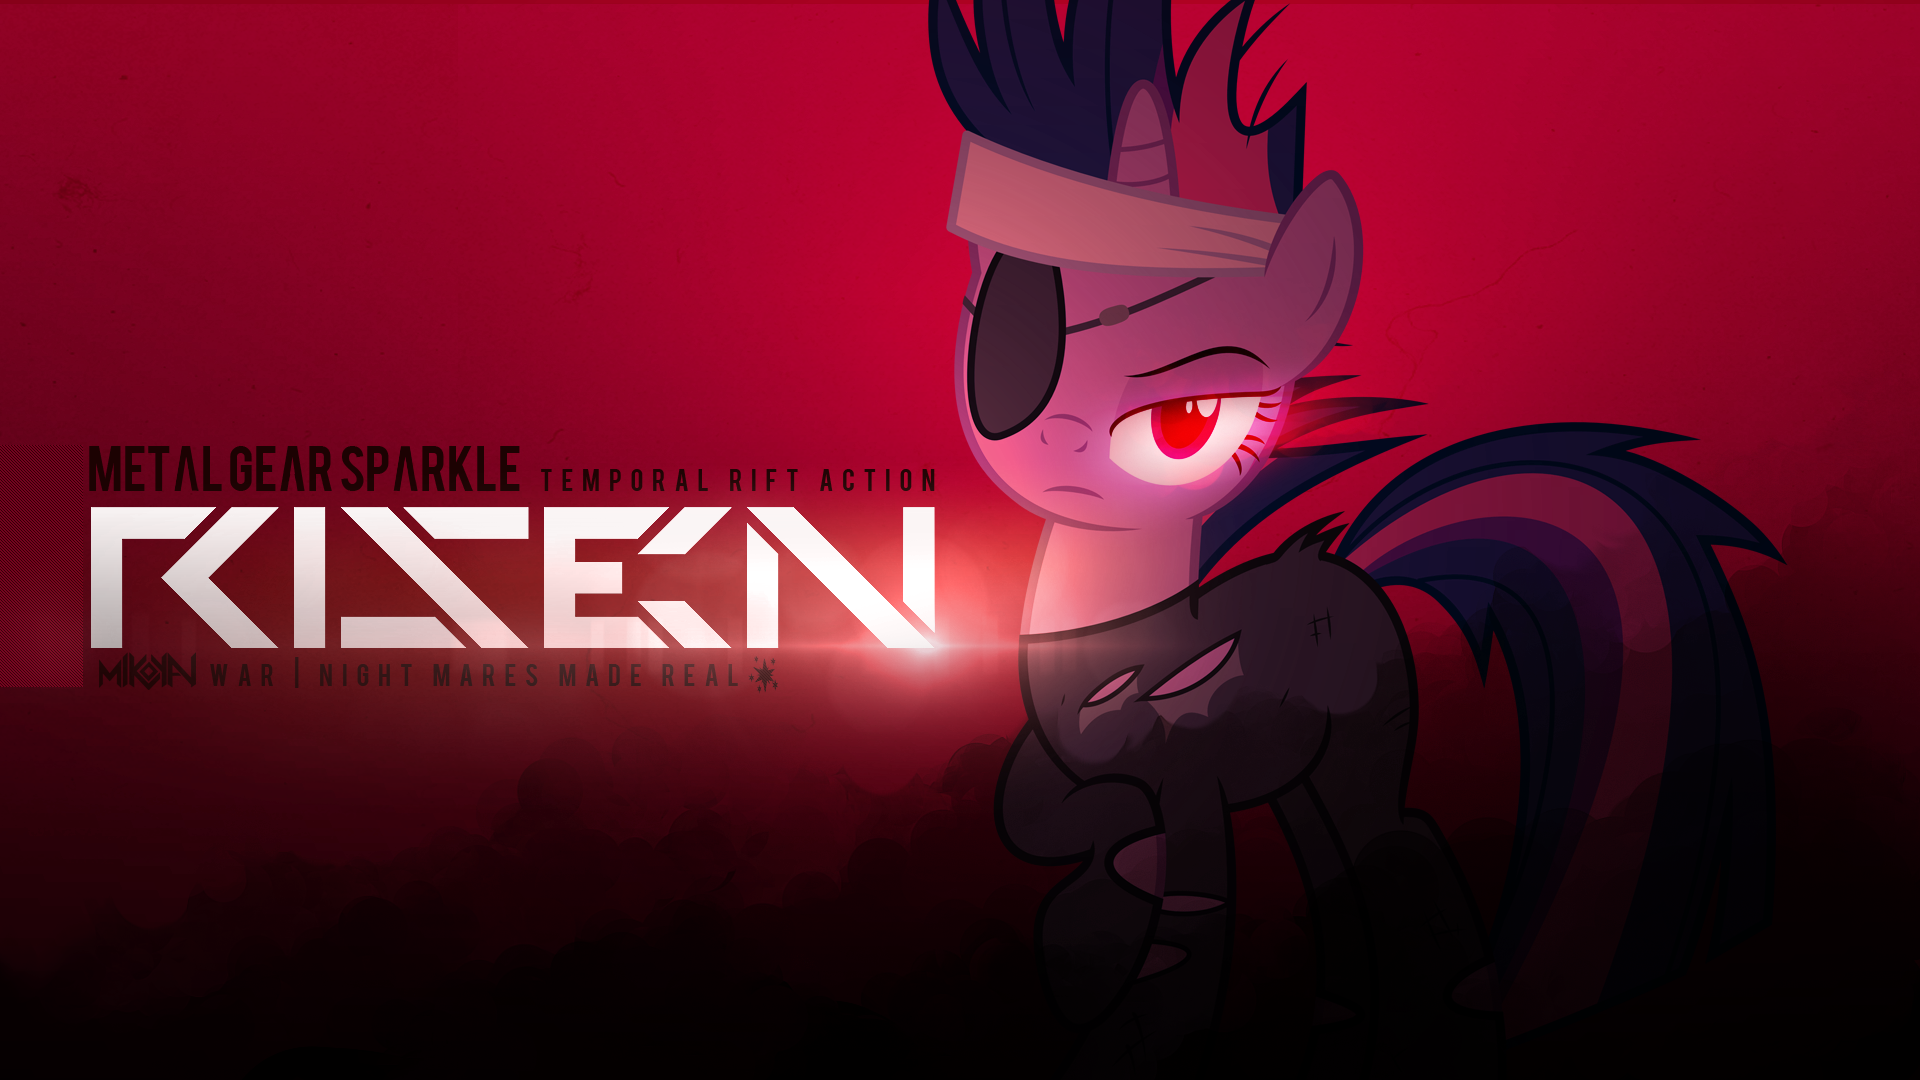 Metal Gear Sparkle: RISEN by BlackGryph0n, MikoyaNx and ZuTheSkunk